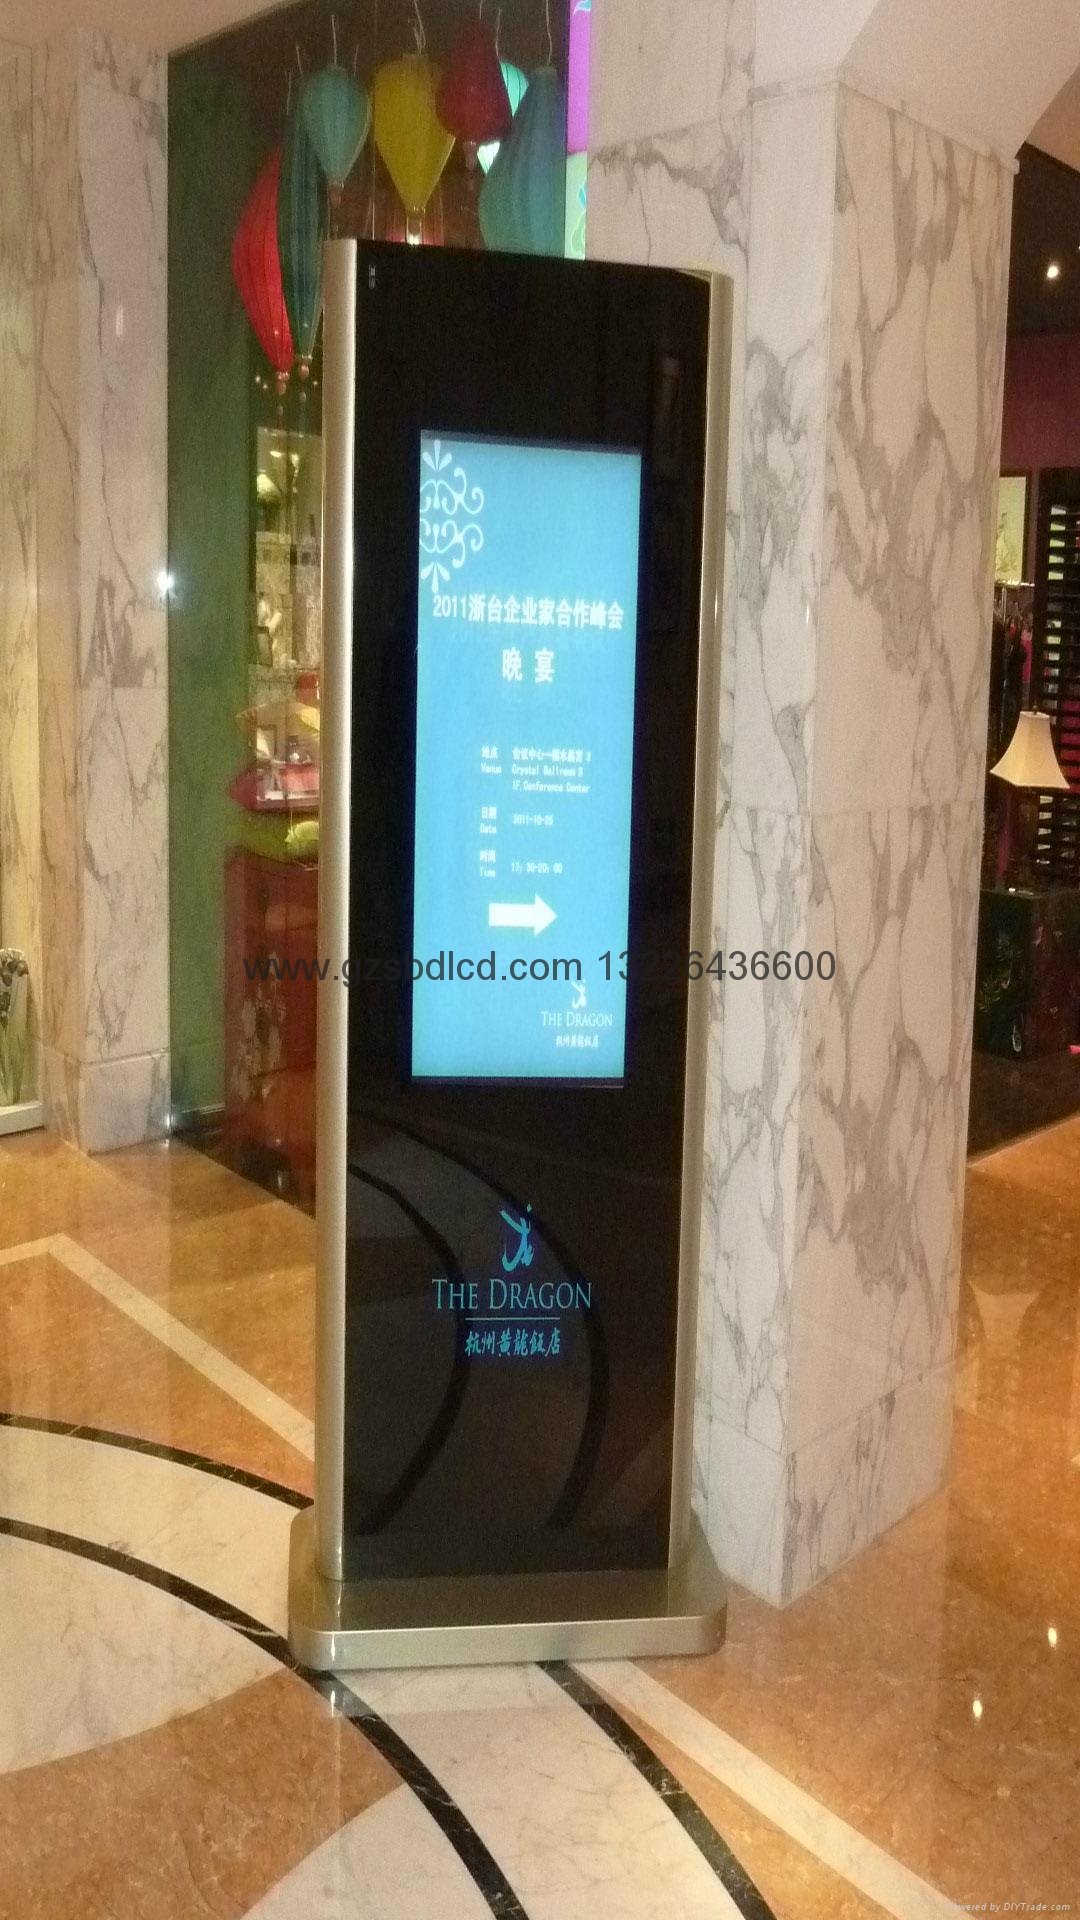 28-inch vertical lcd displays (length of the screen) 18